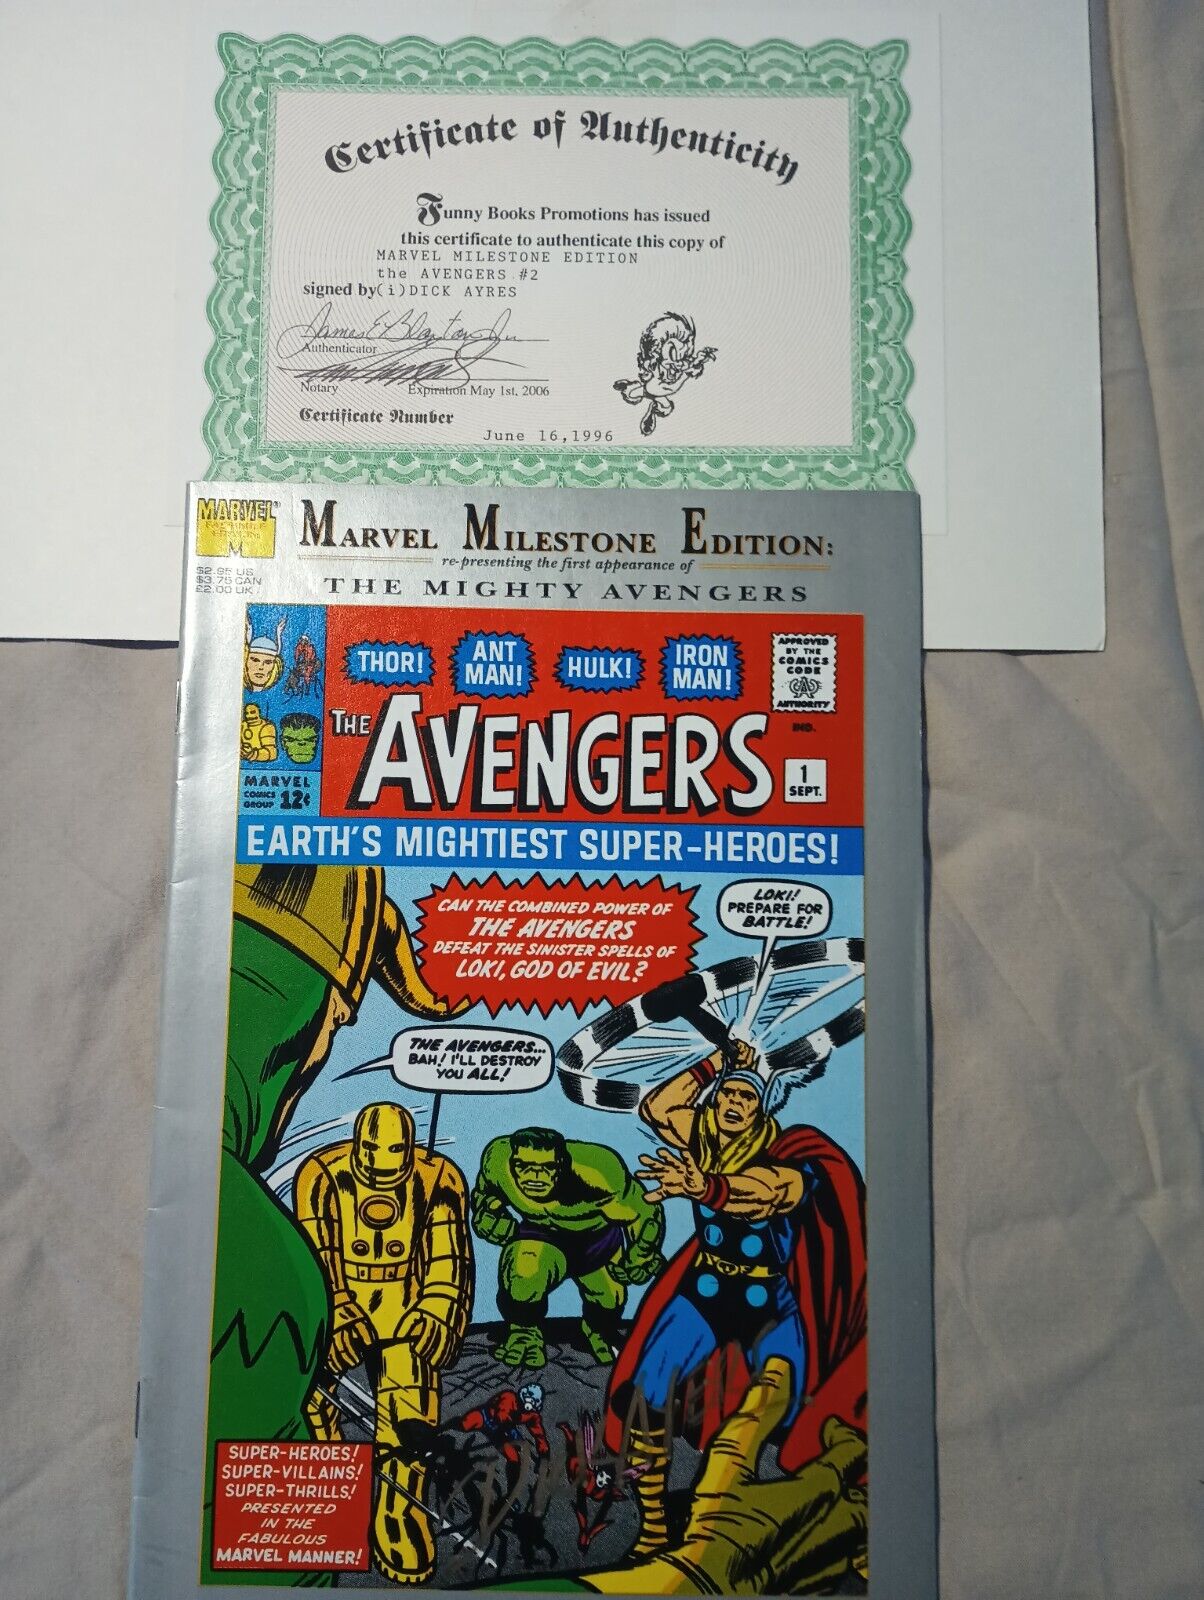 Marvel Milestone Edition: The Avengers #1 (NM-) Marvel 1993 signed Dick Ayers